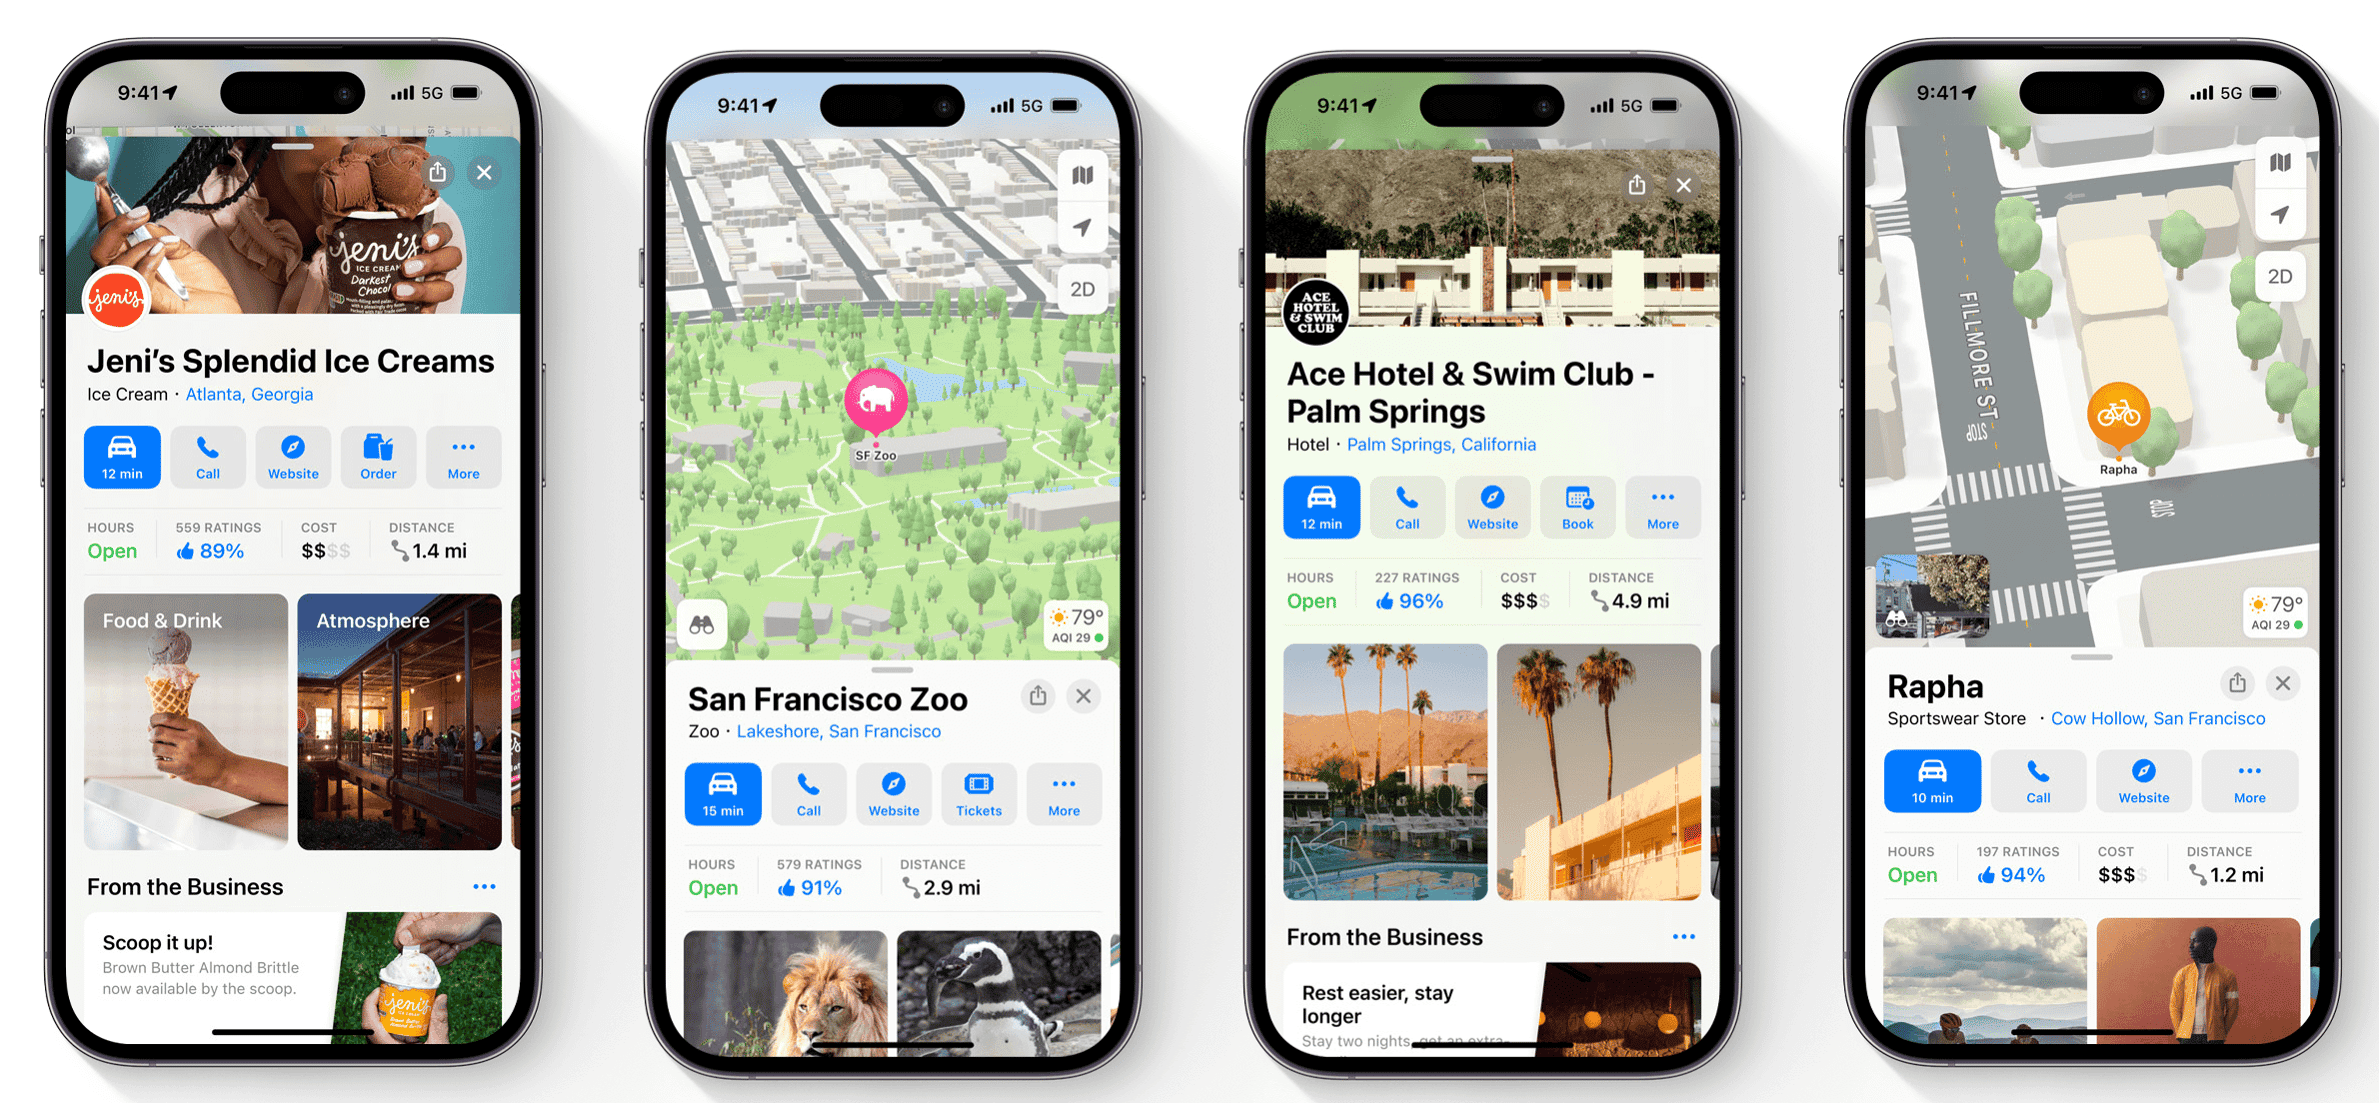 A preview of Apple Business Connect that local business owners will see in the app.